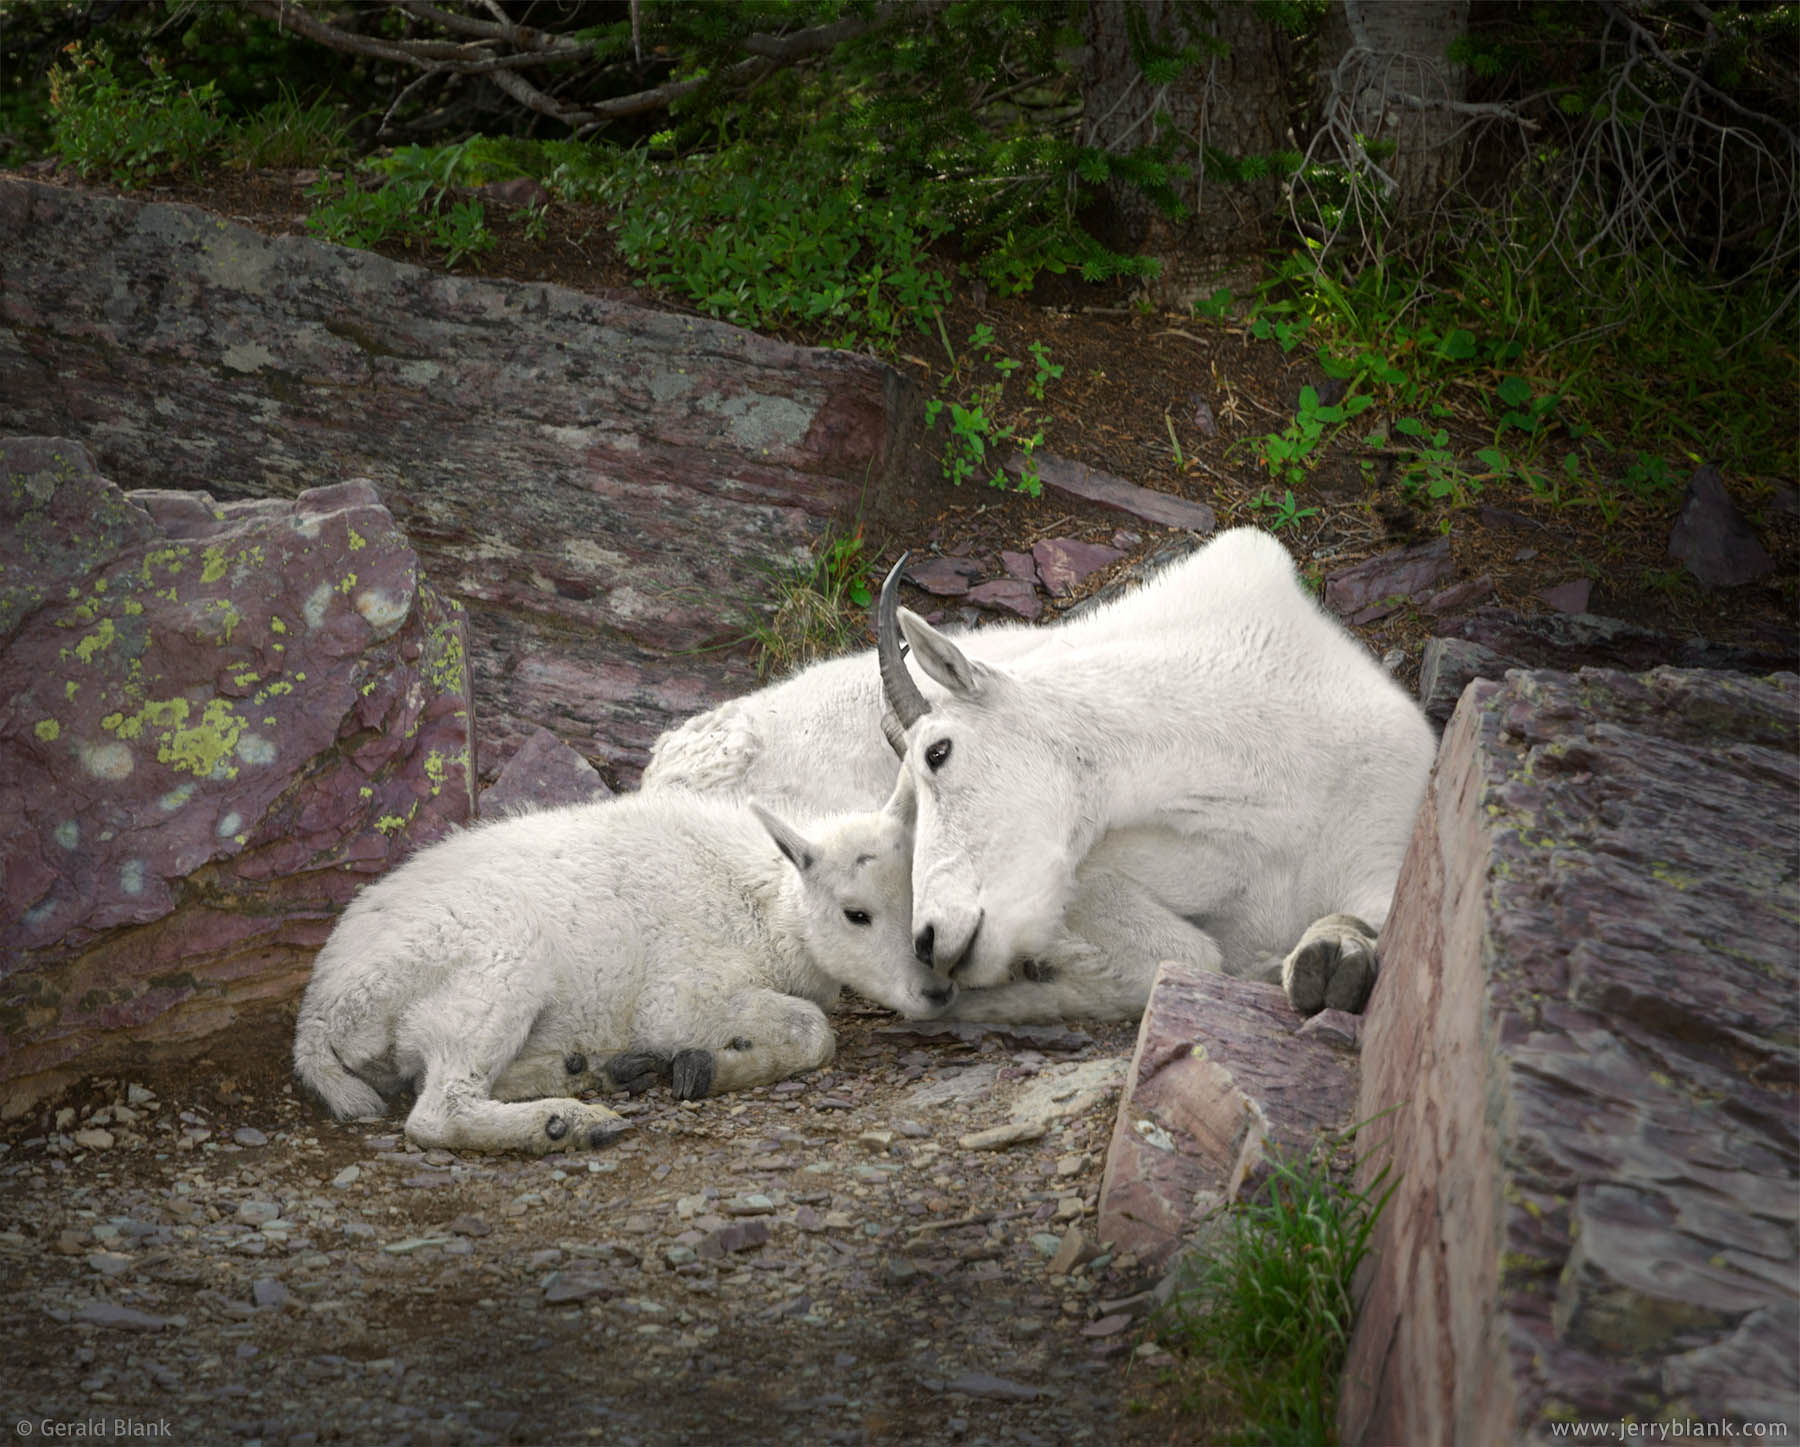 #25570 - A mountain goat kid rests with its mother in the shade on a summer afternoon, in Glacier National Park, Montana - wildlife photo by Jerry Blank